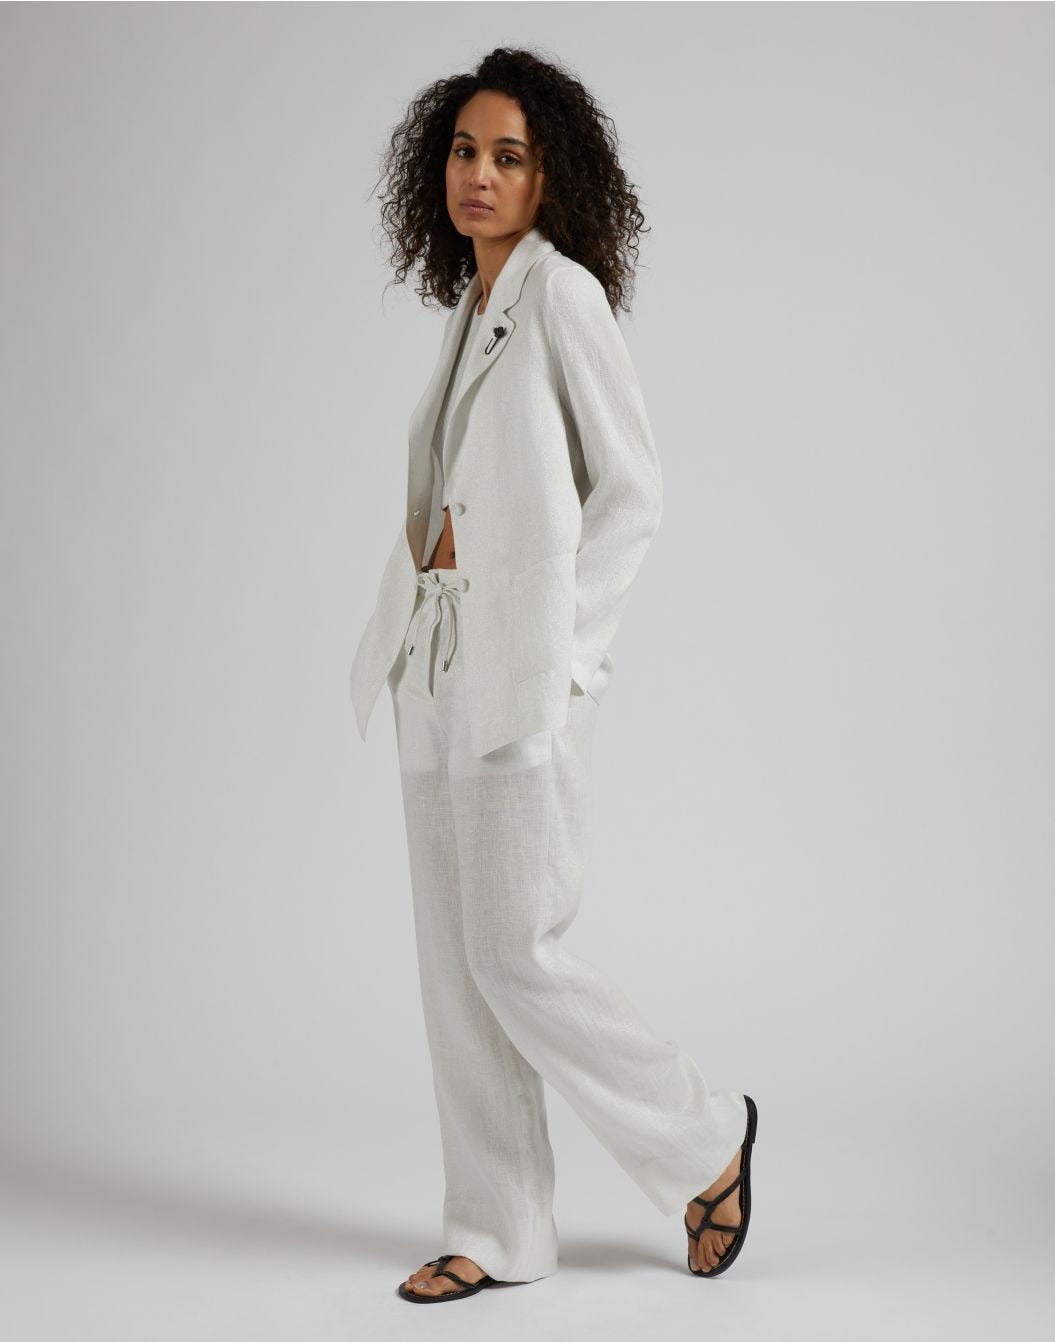 White and silver lurex linen single-breasted jacket